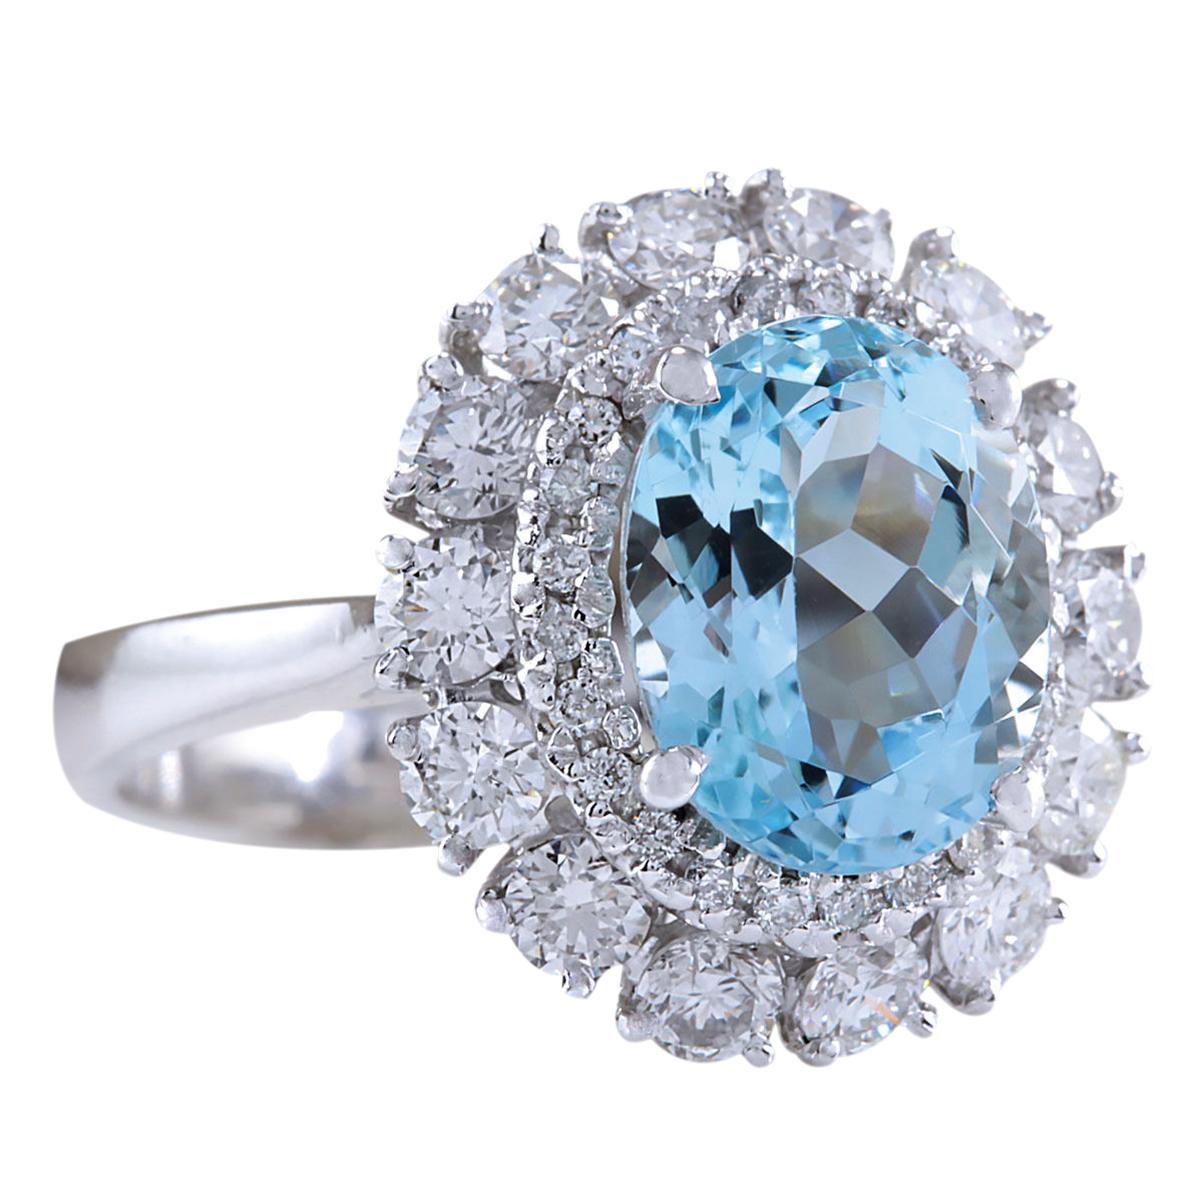 4.40 Carat Natural Aquamarine 14 Karat White Gold Diamond Ring
Stamped: 14K White Gold
Total Ring Weight: 5.1 Grams
Total Natural Aquamarine Weight is 2.90 Carat (Measures: 10.00x8.00 mm)
Color: Blue
Total Natural Diamond Weight is 1.50 Carat
Color: